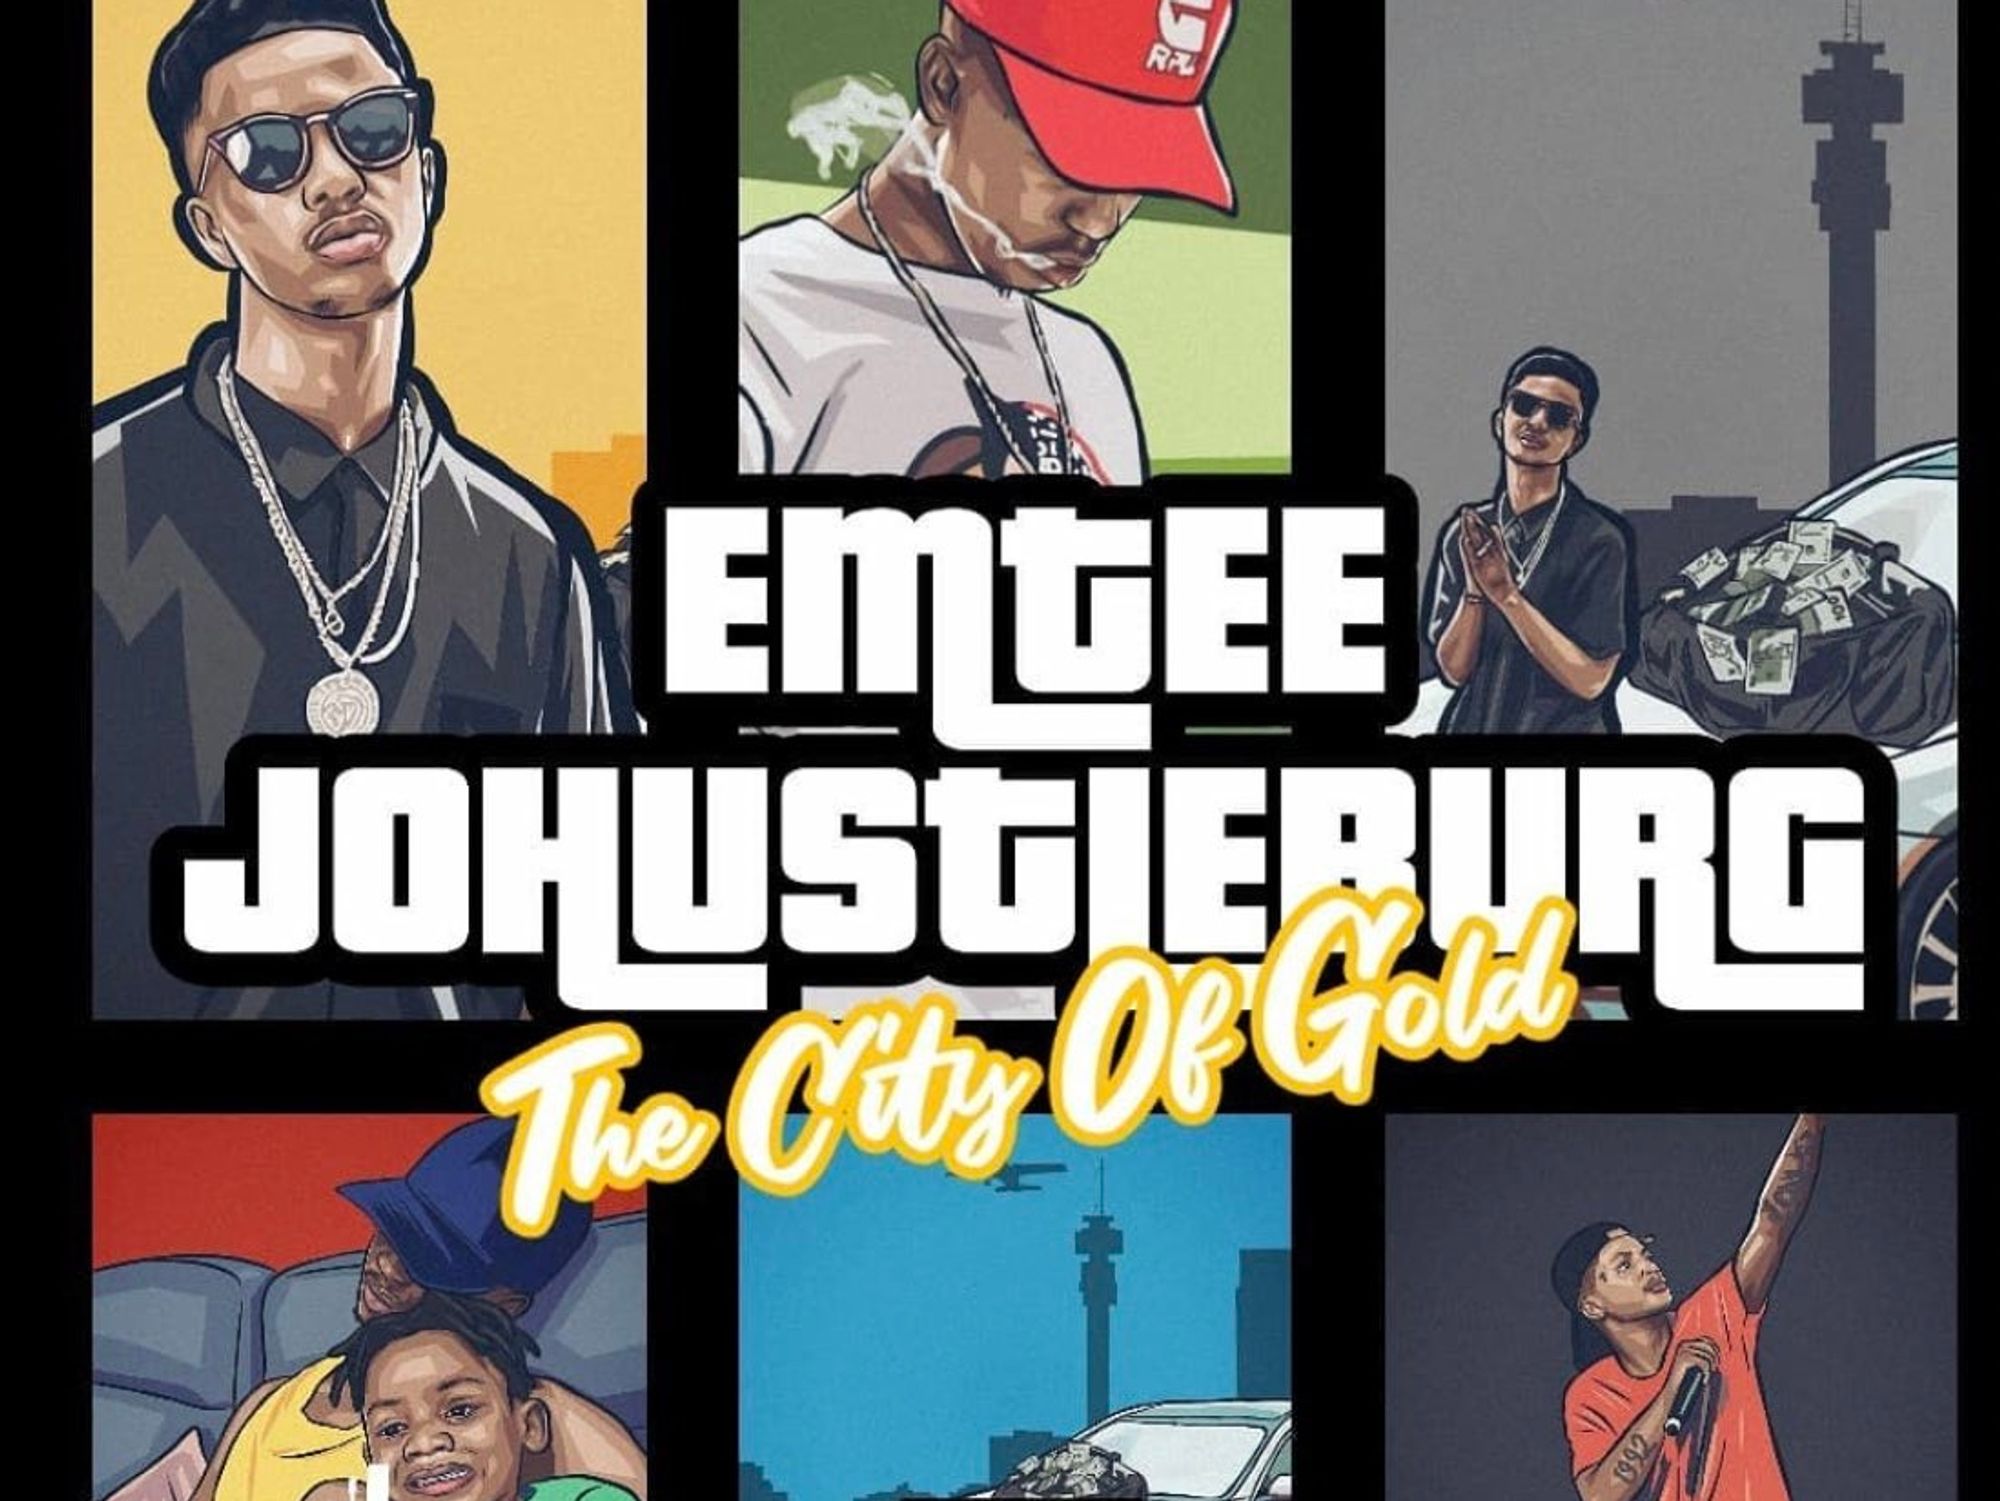 The artwork for Emtee's latest single "Johustleburg": a Grand Theft Auto-style collage of Emtee in different scenarios. 